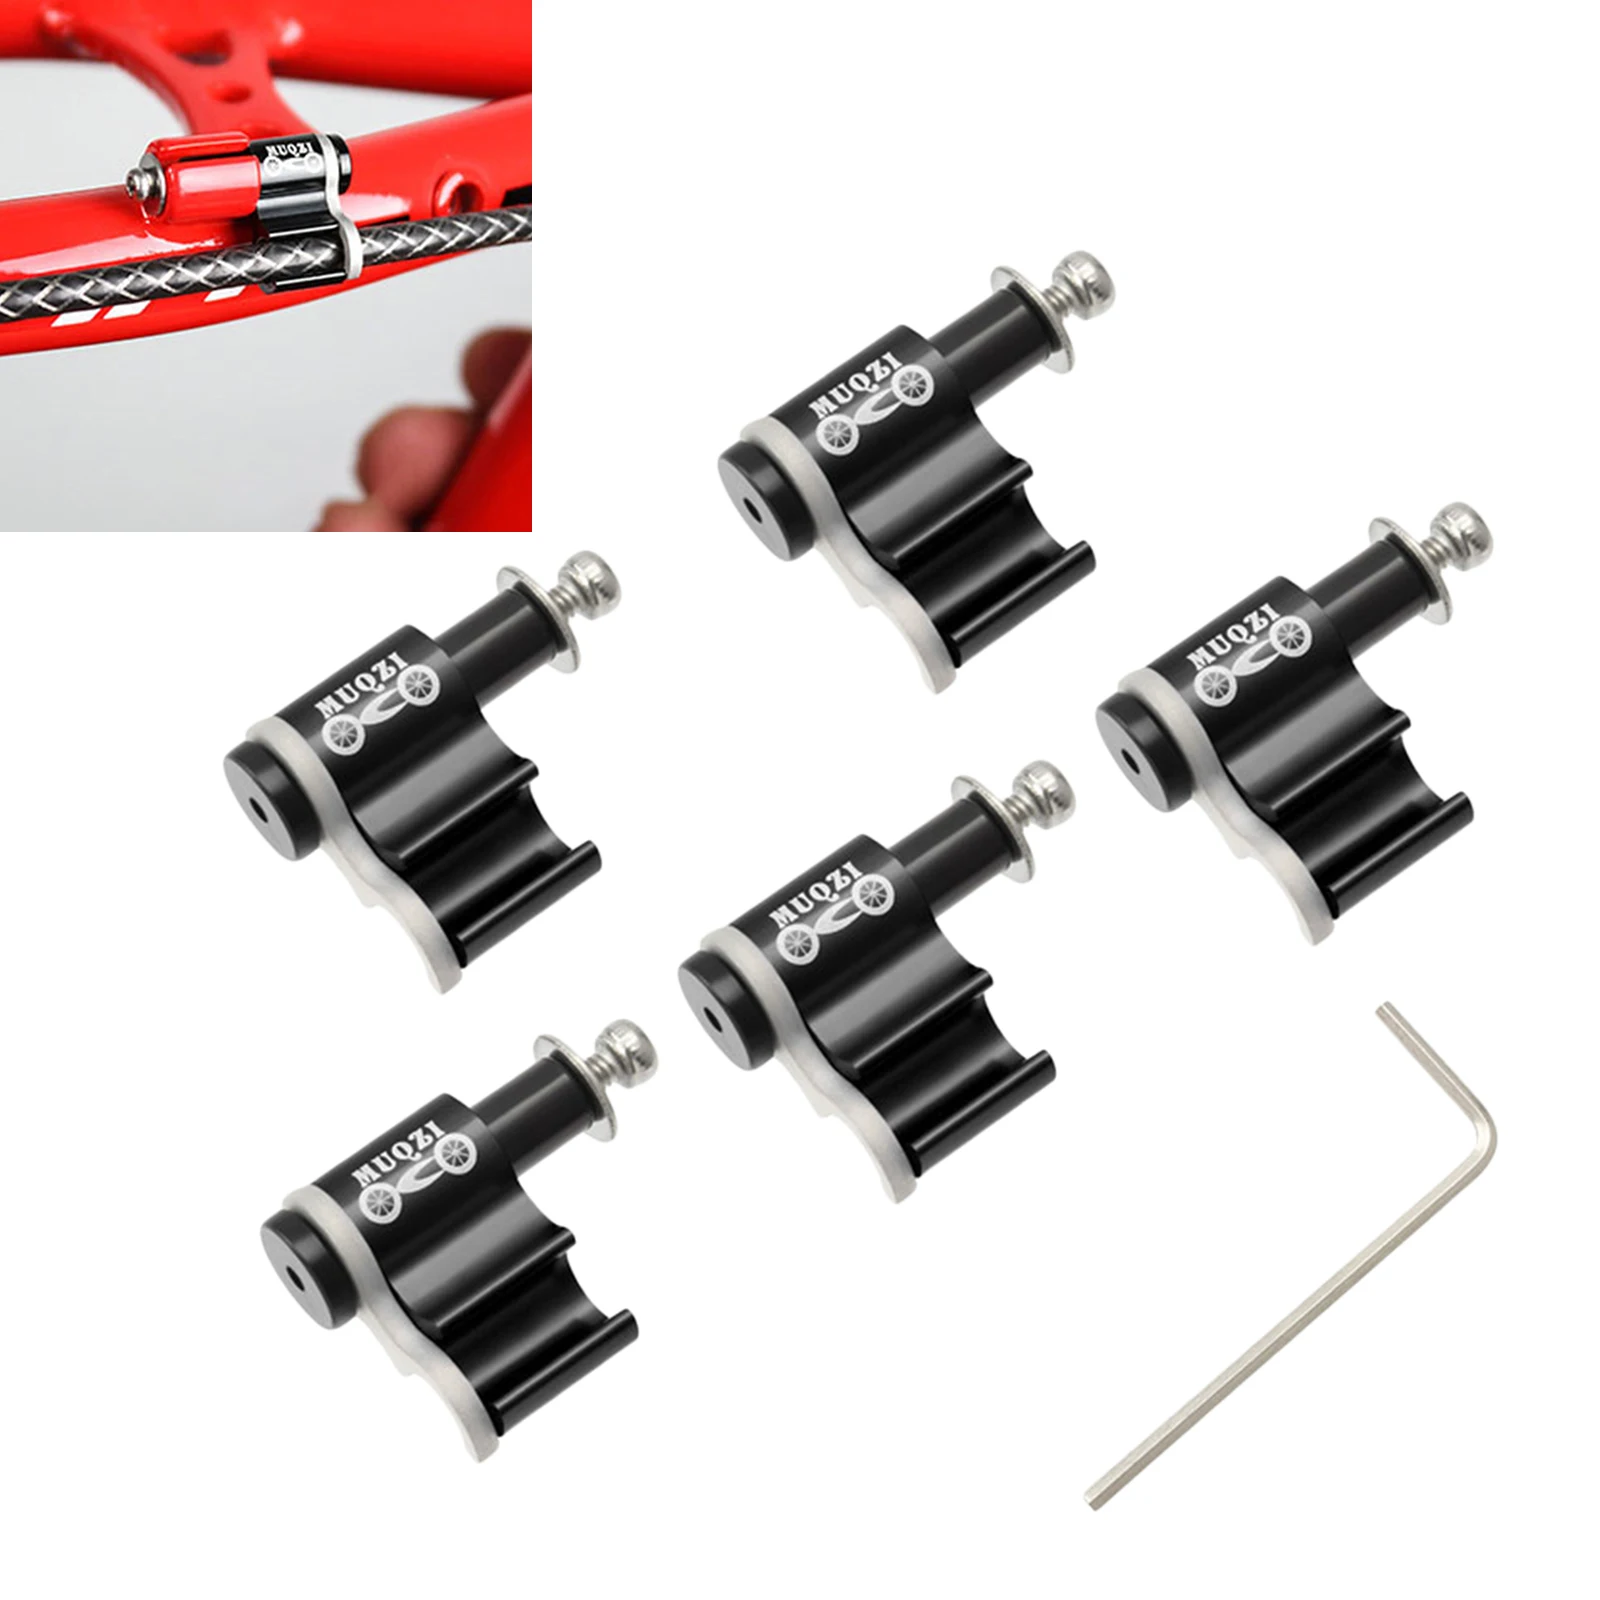 5pcs Aluminum Alloy Bike Cable Clips Brake Cable Housing Clip Bicycle Cable Hose Guide Clamps for Brake Derailleur Cables